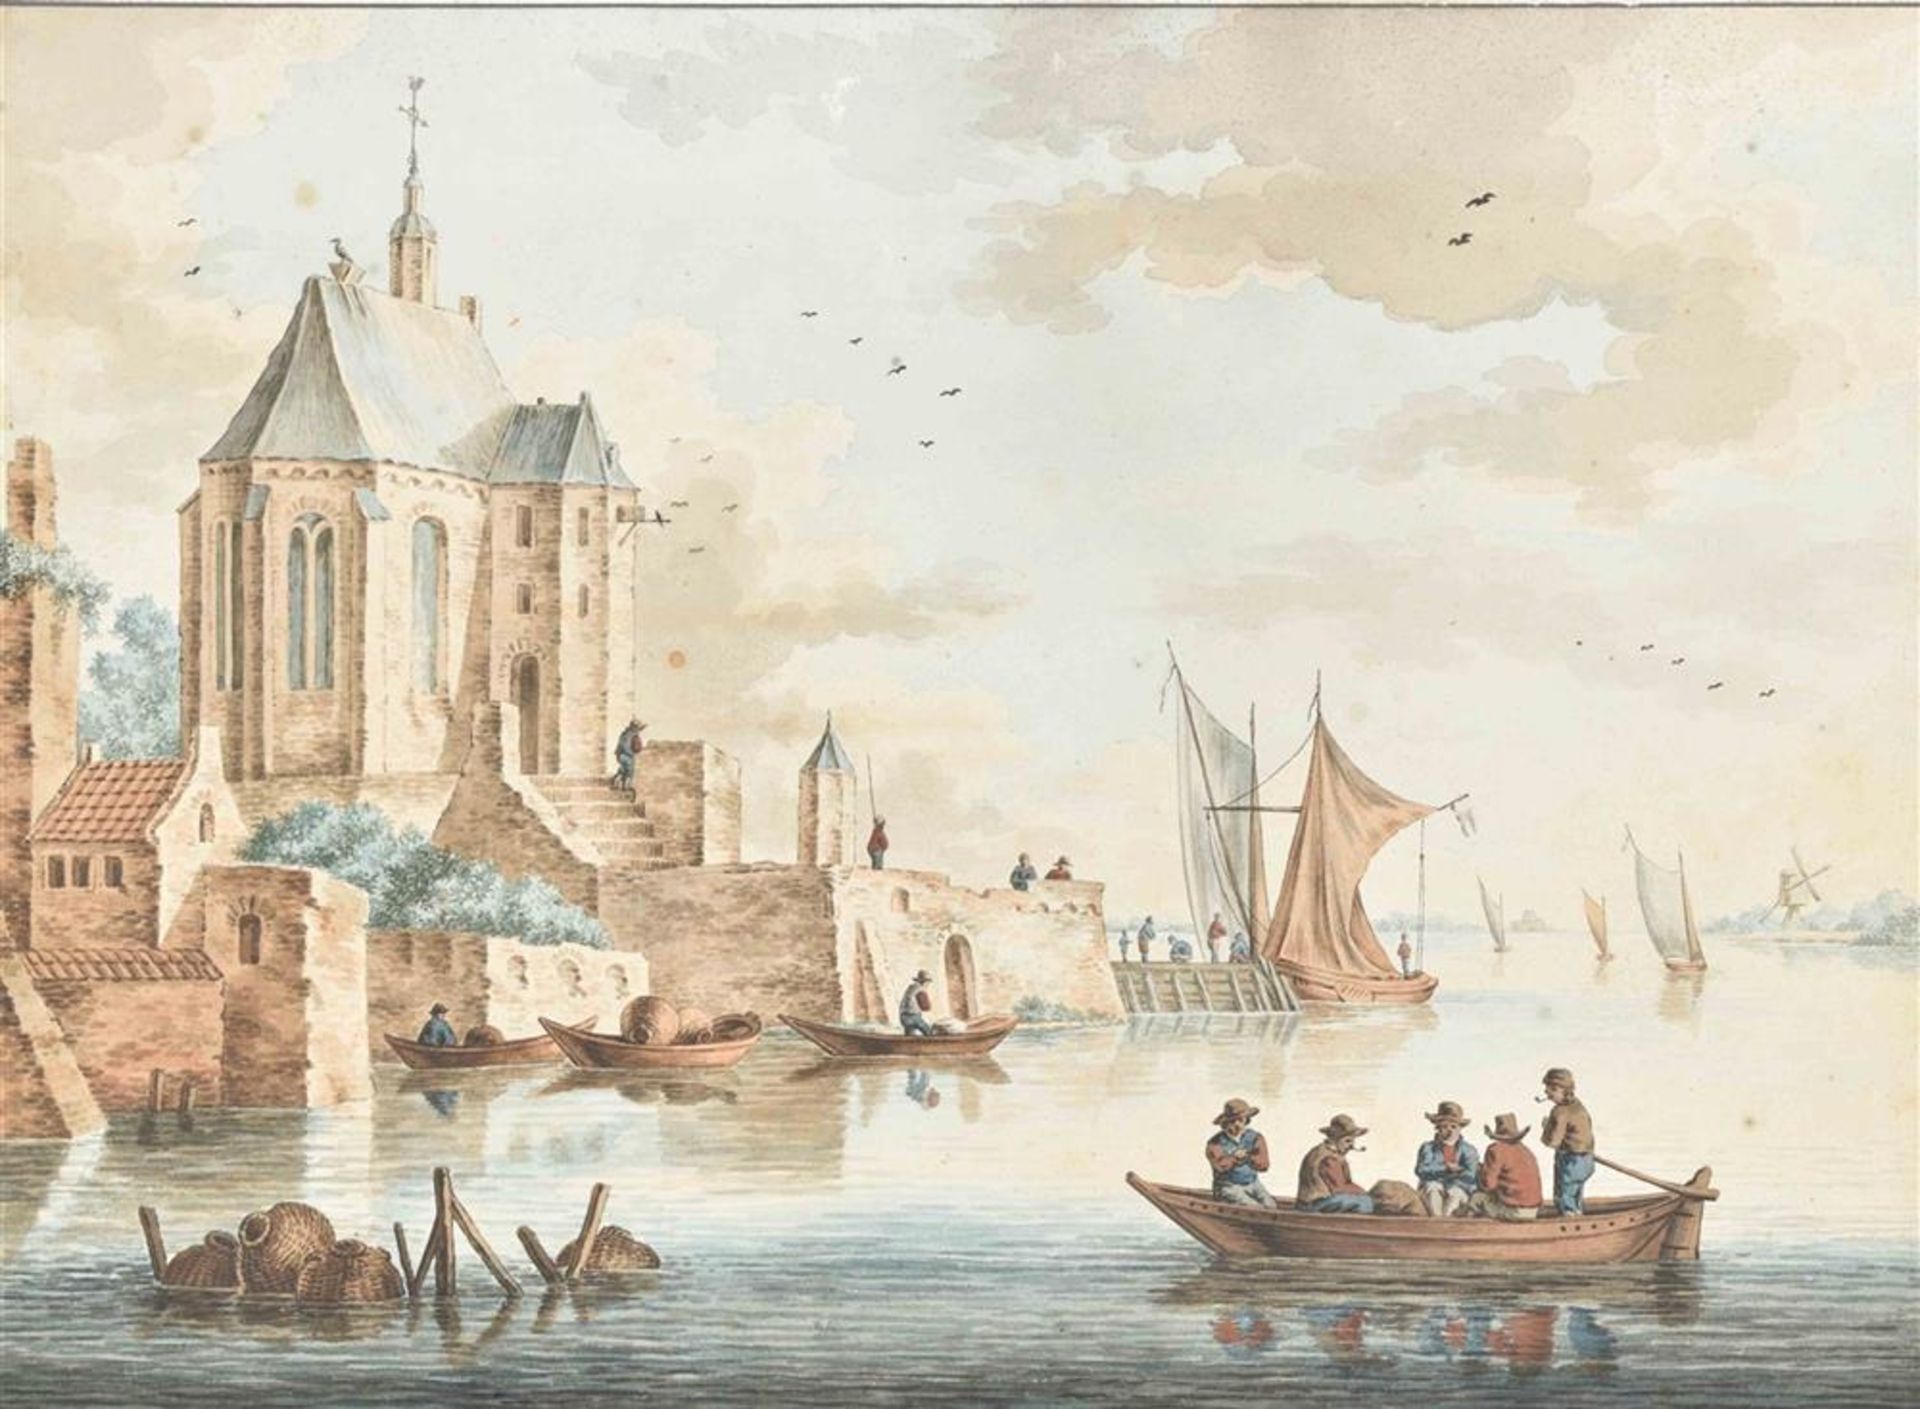 [Netherlands] View of a Romanesque chapel on a river - Image 3 of 3